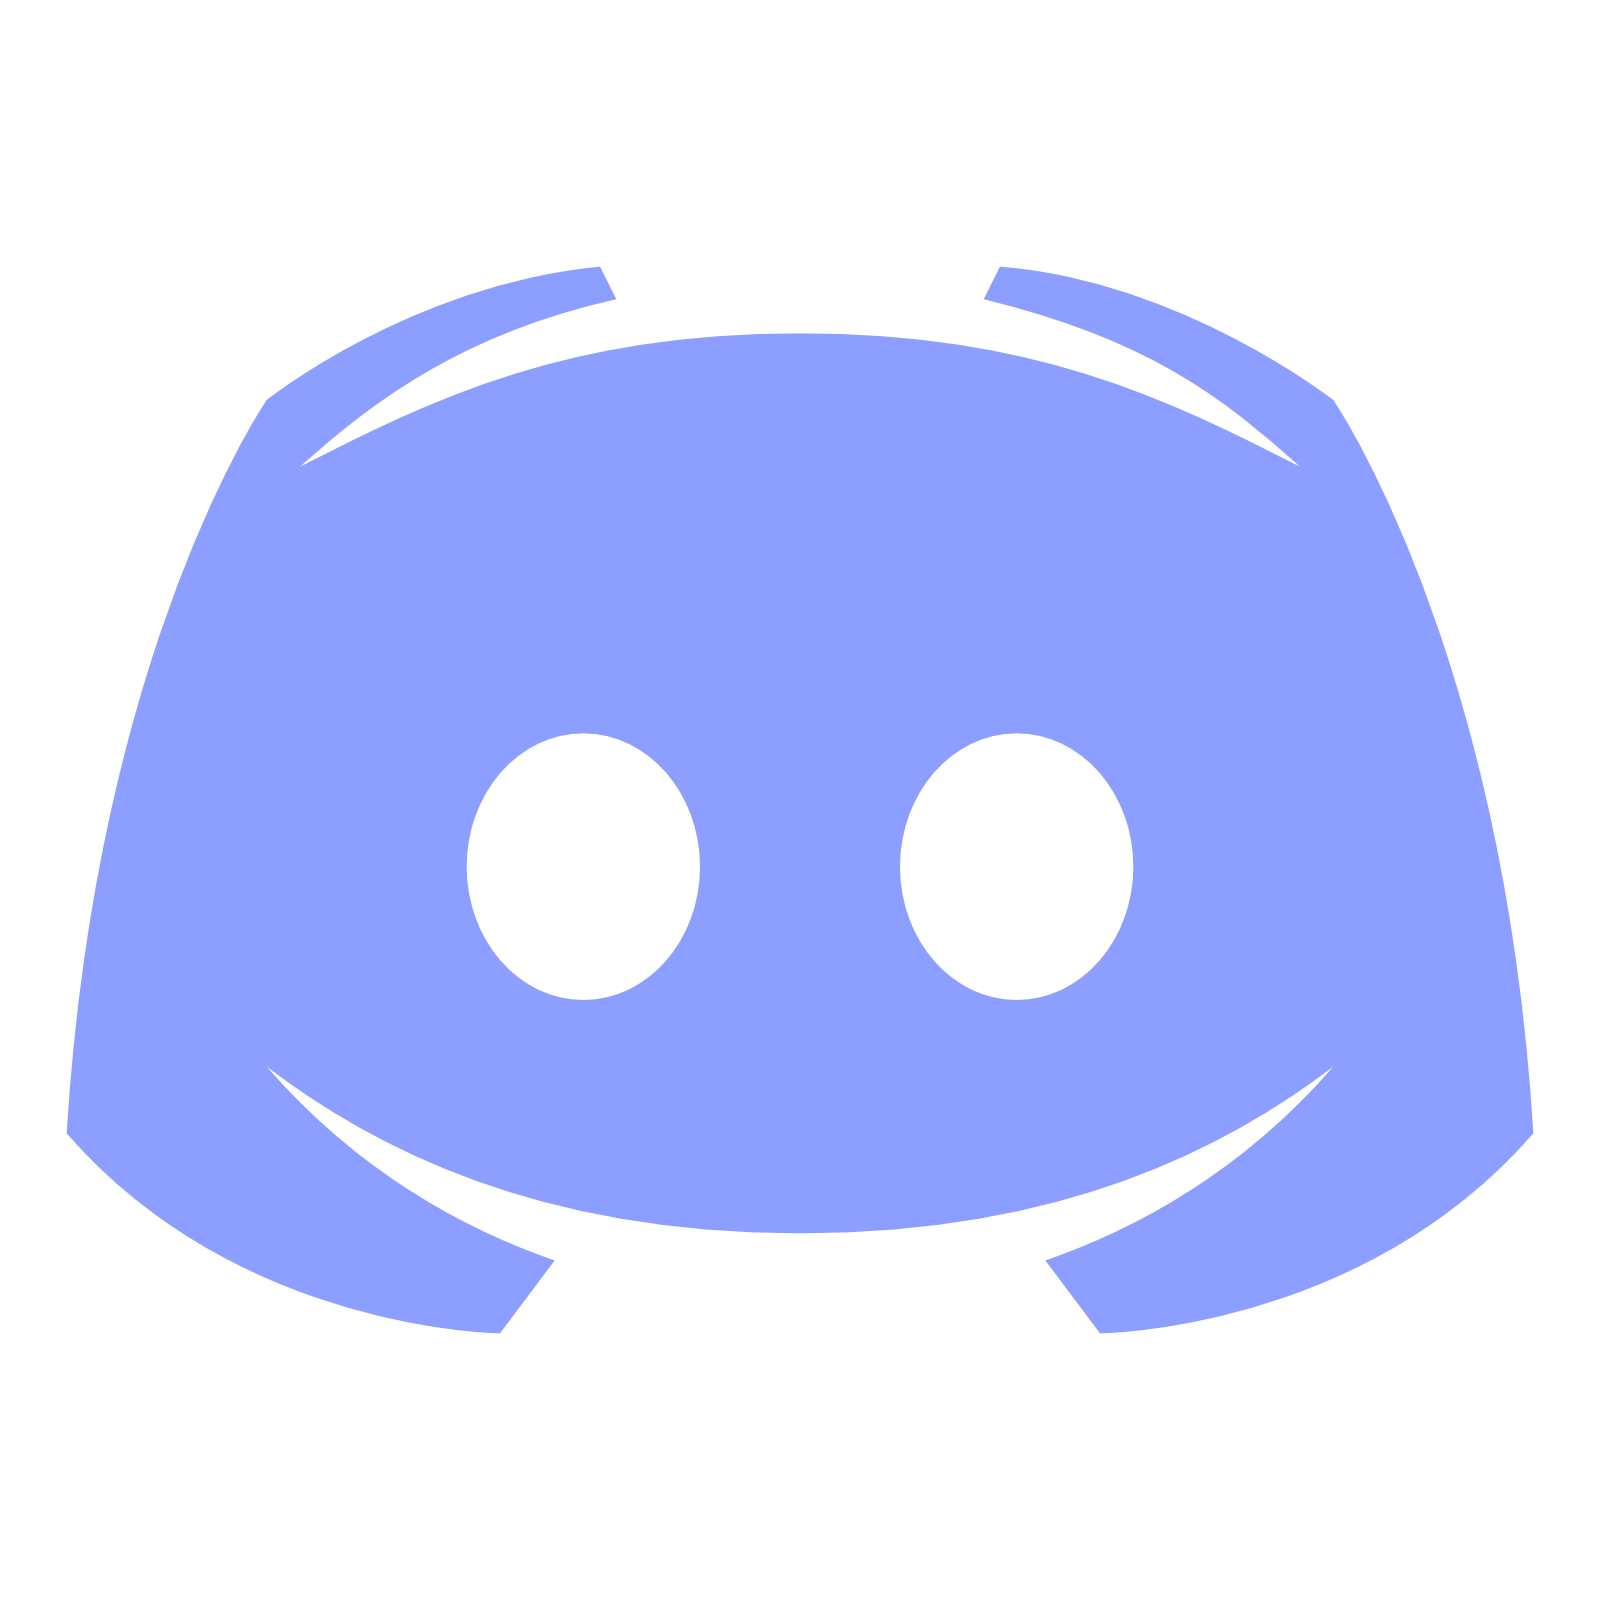 Discord Icon Free - Social Media  Logos Icons in SVG and PNG 